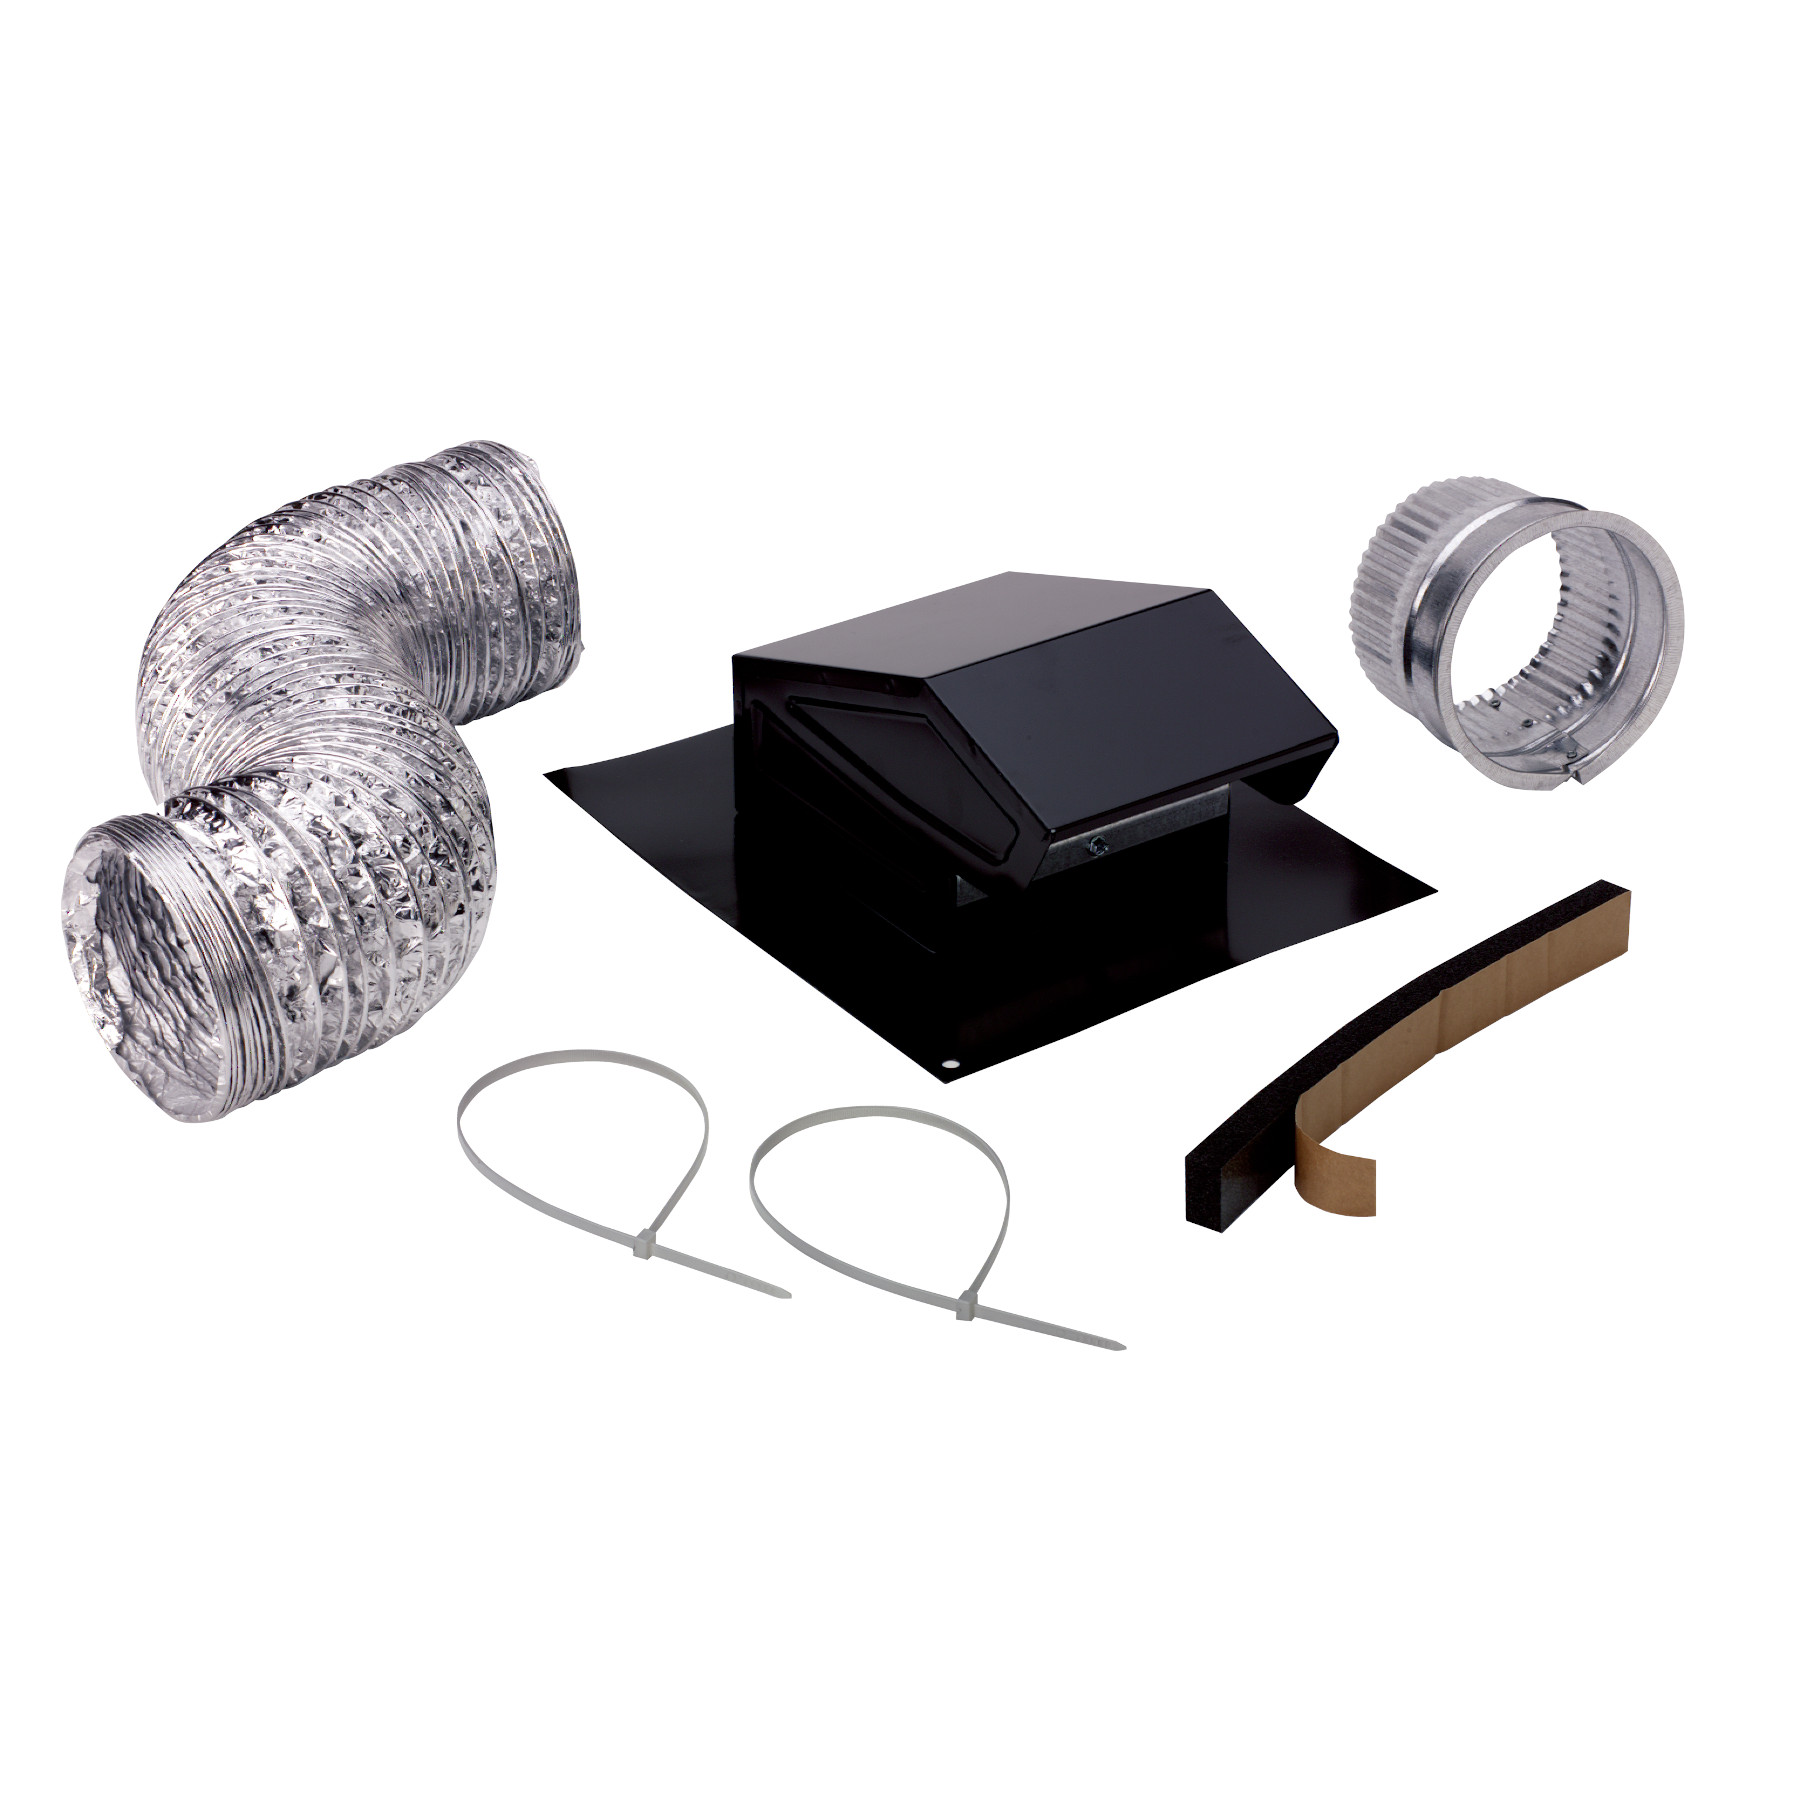 Broan® Roof Vent Kit, 8-Foot of 4-Inch flexible aluminum duct.